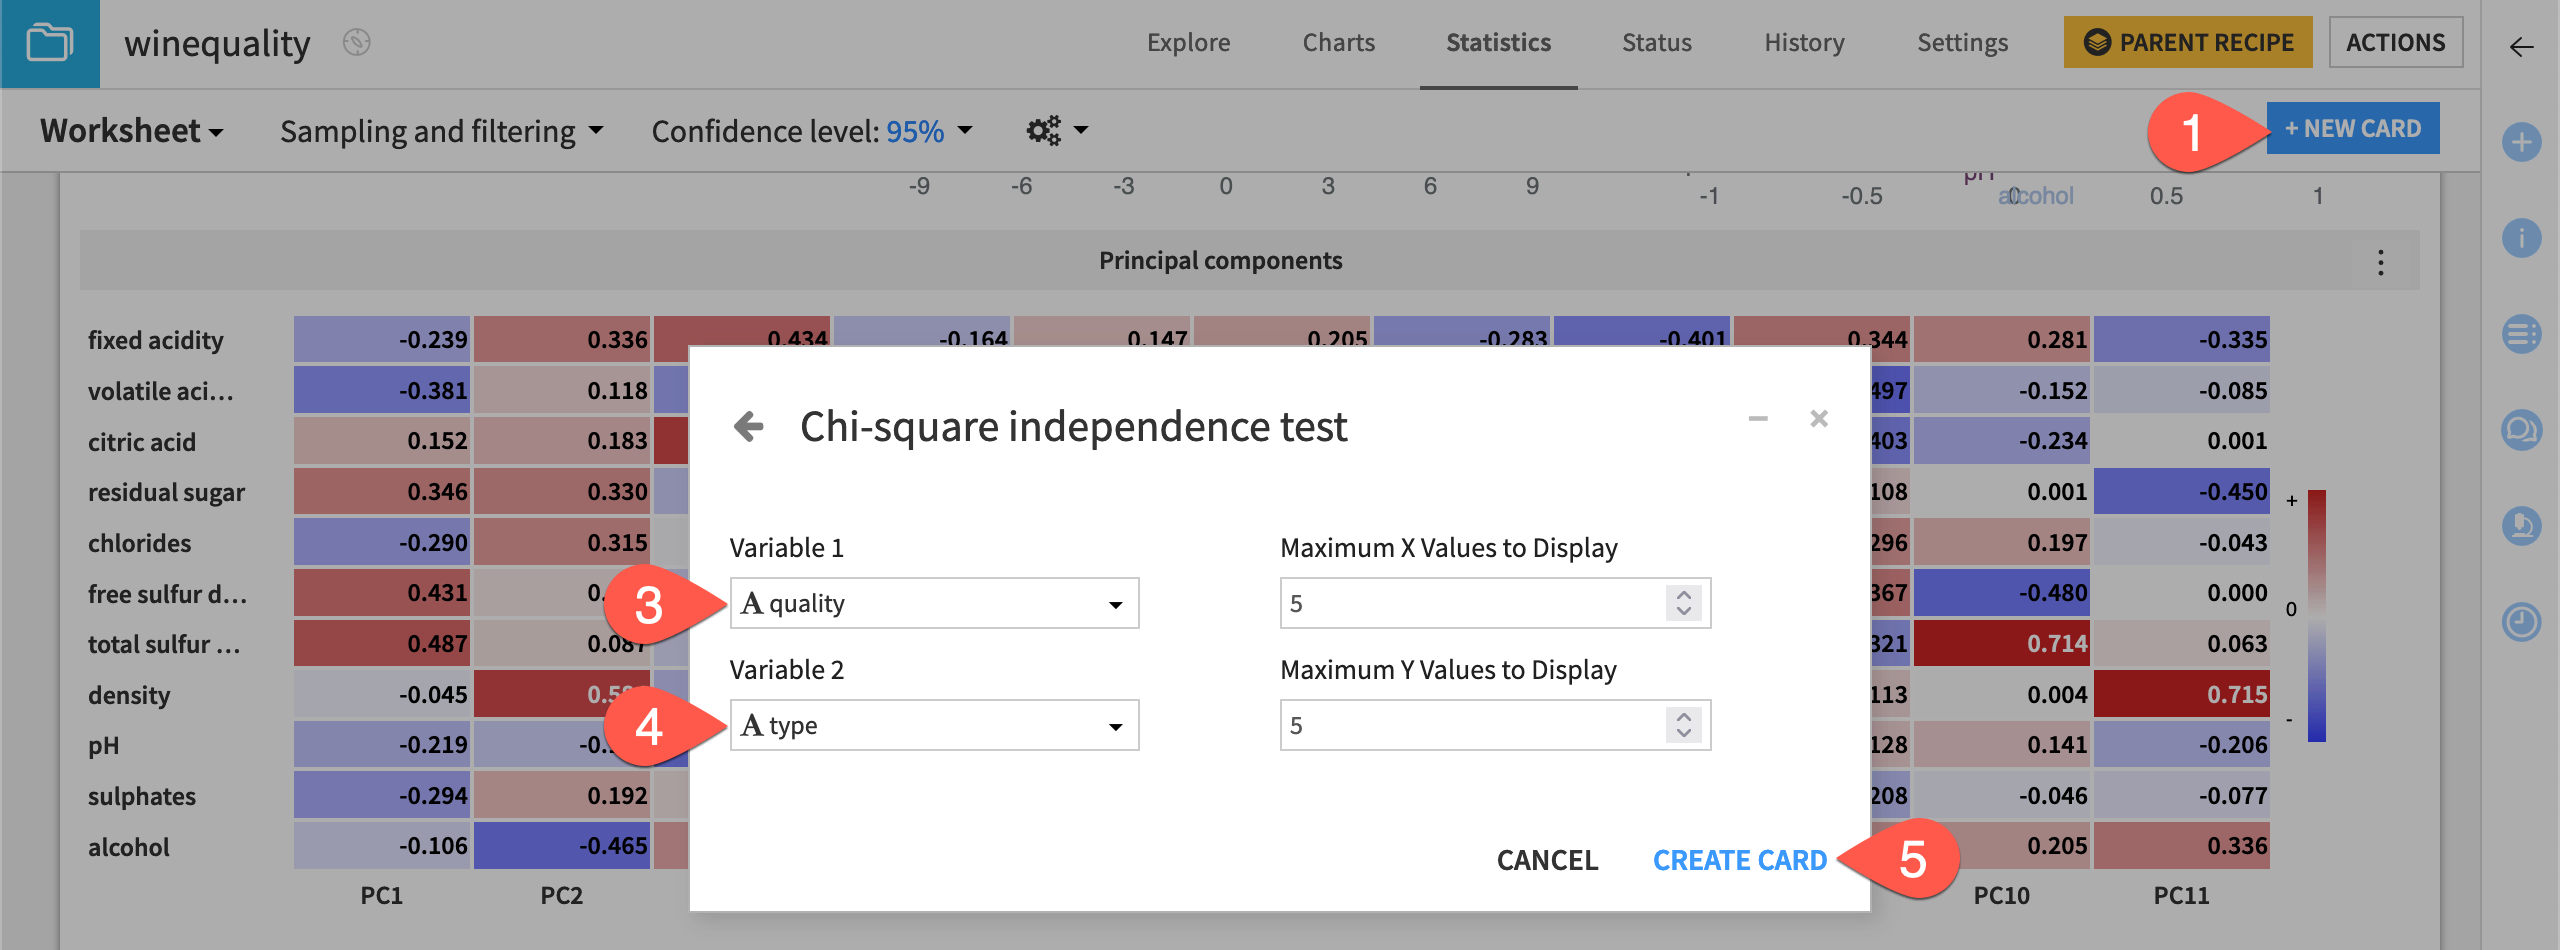 Dataiku screenshot of the dialog to create a chi-square independence test card.